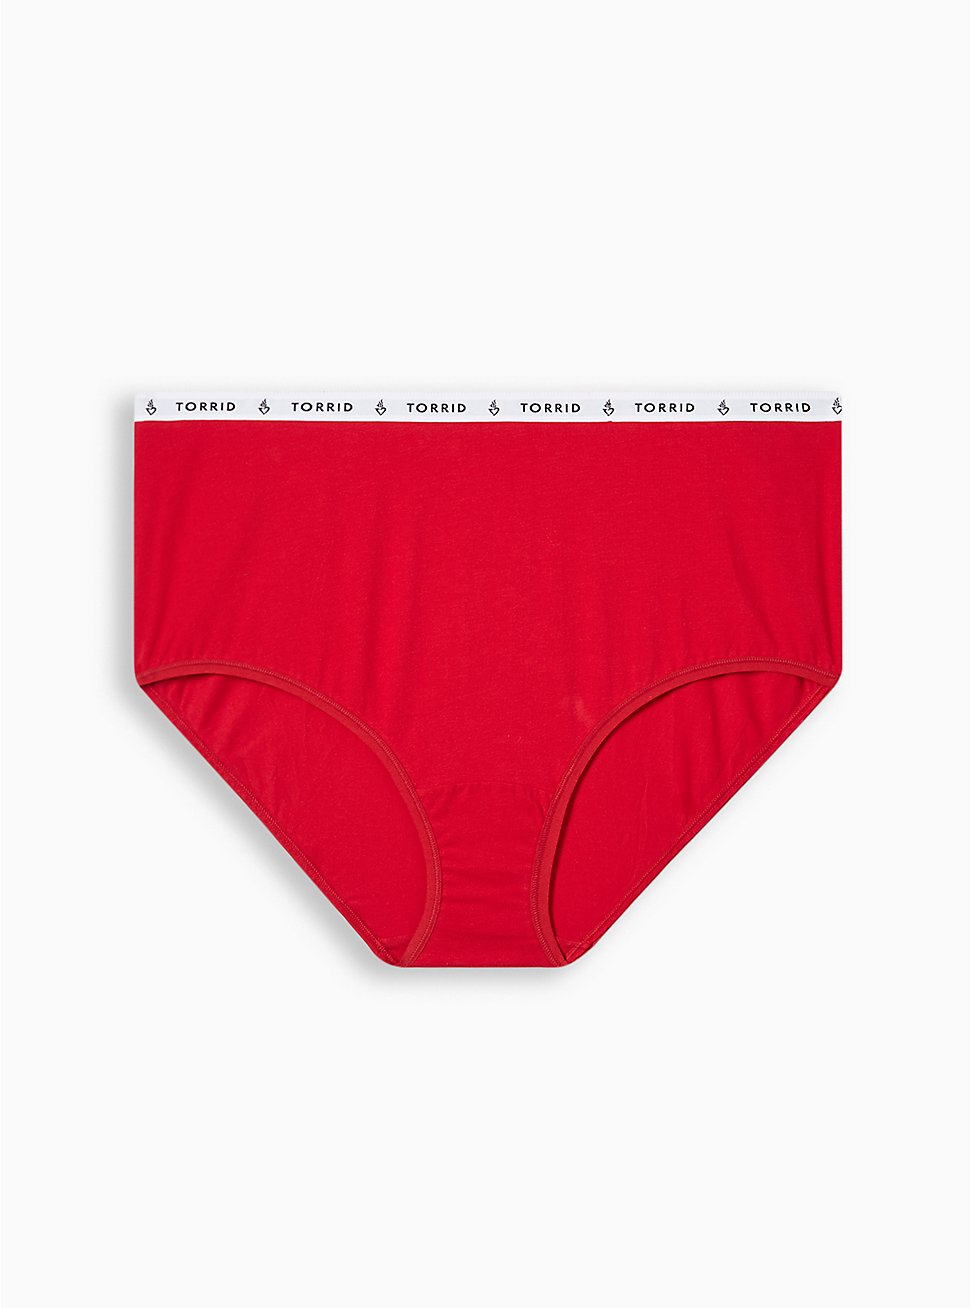 Plus Size Cotton High Rise Cheeky Logo Panty, JESTER RED, hi-res